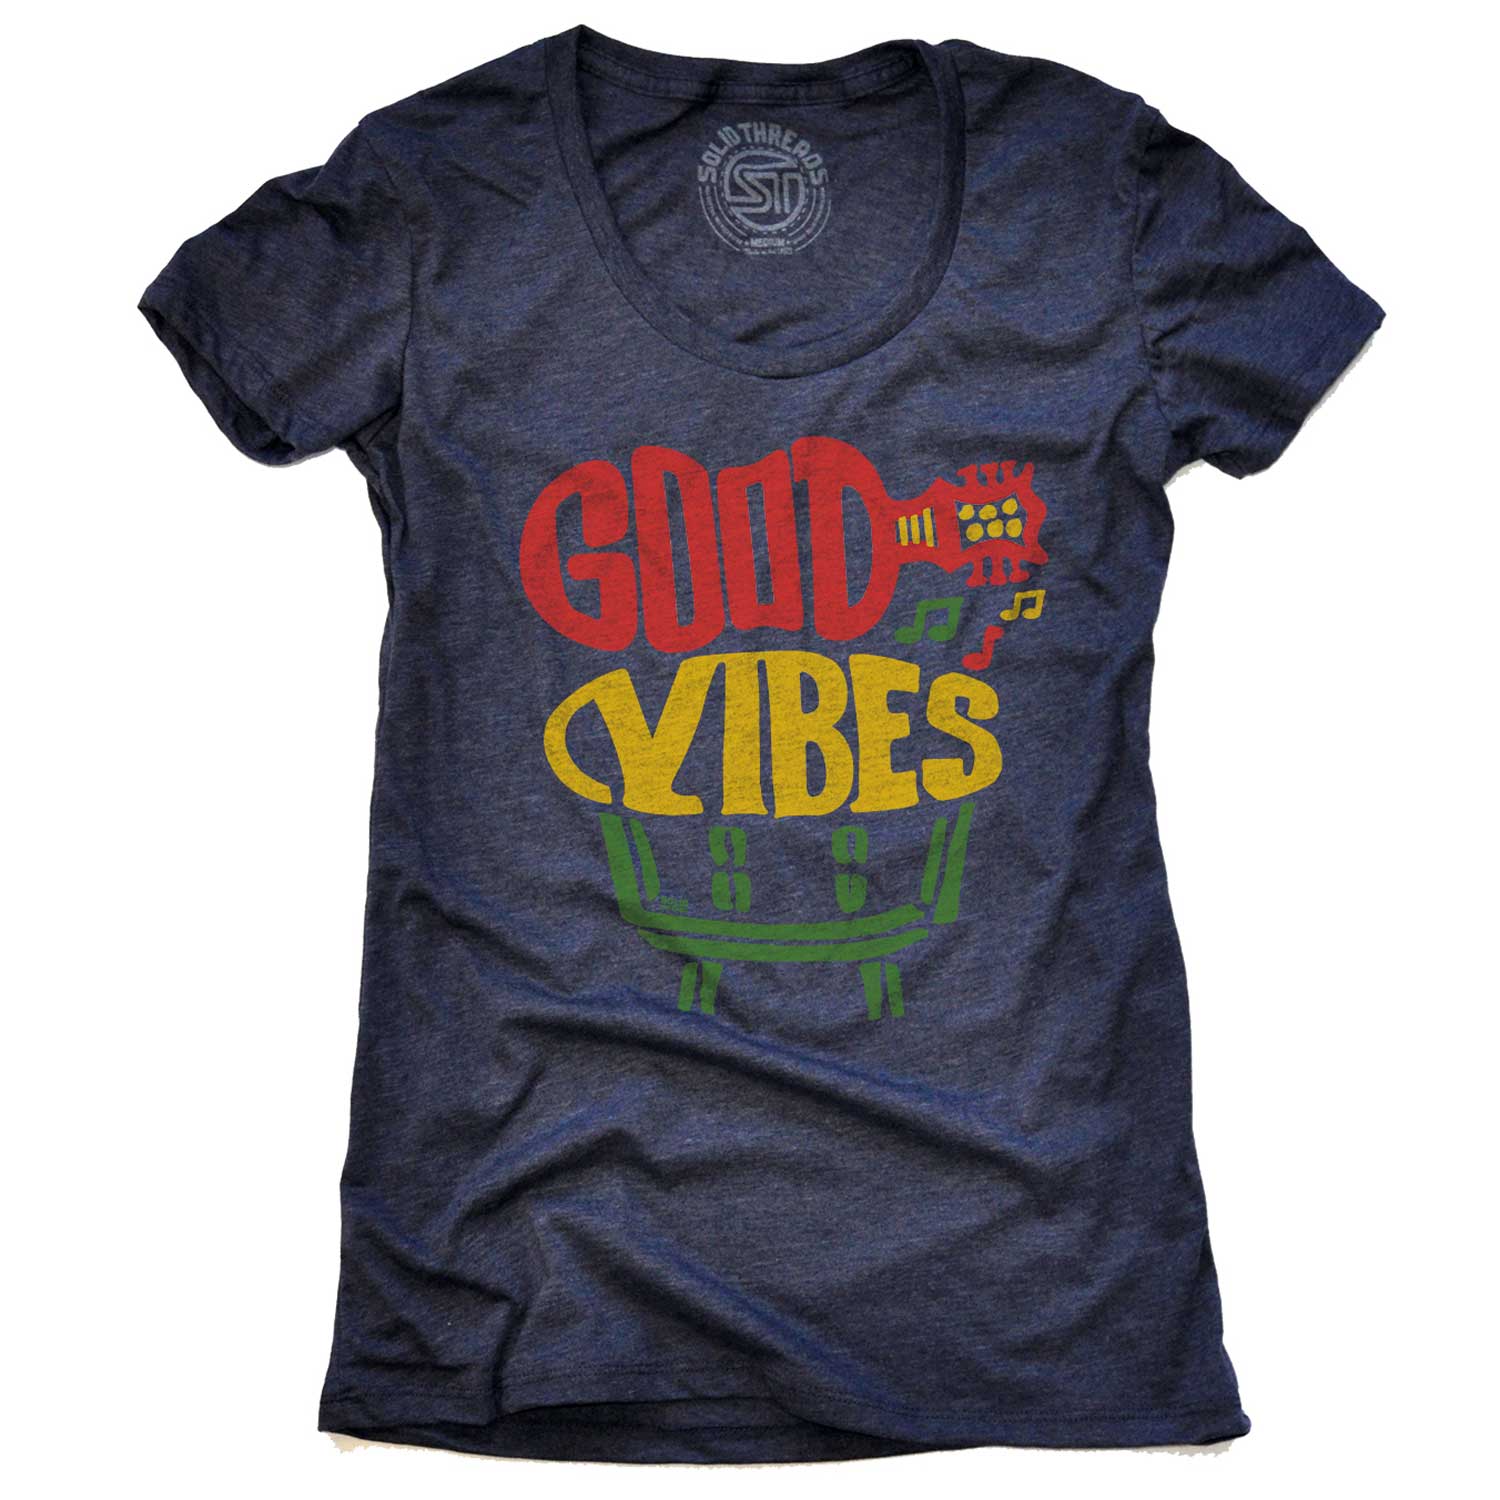 Women's Good Vibes Vintage Graphic Tee | Retro Music T-shirt | Solid Threads